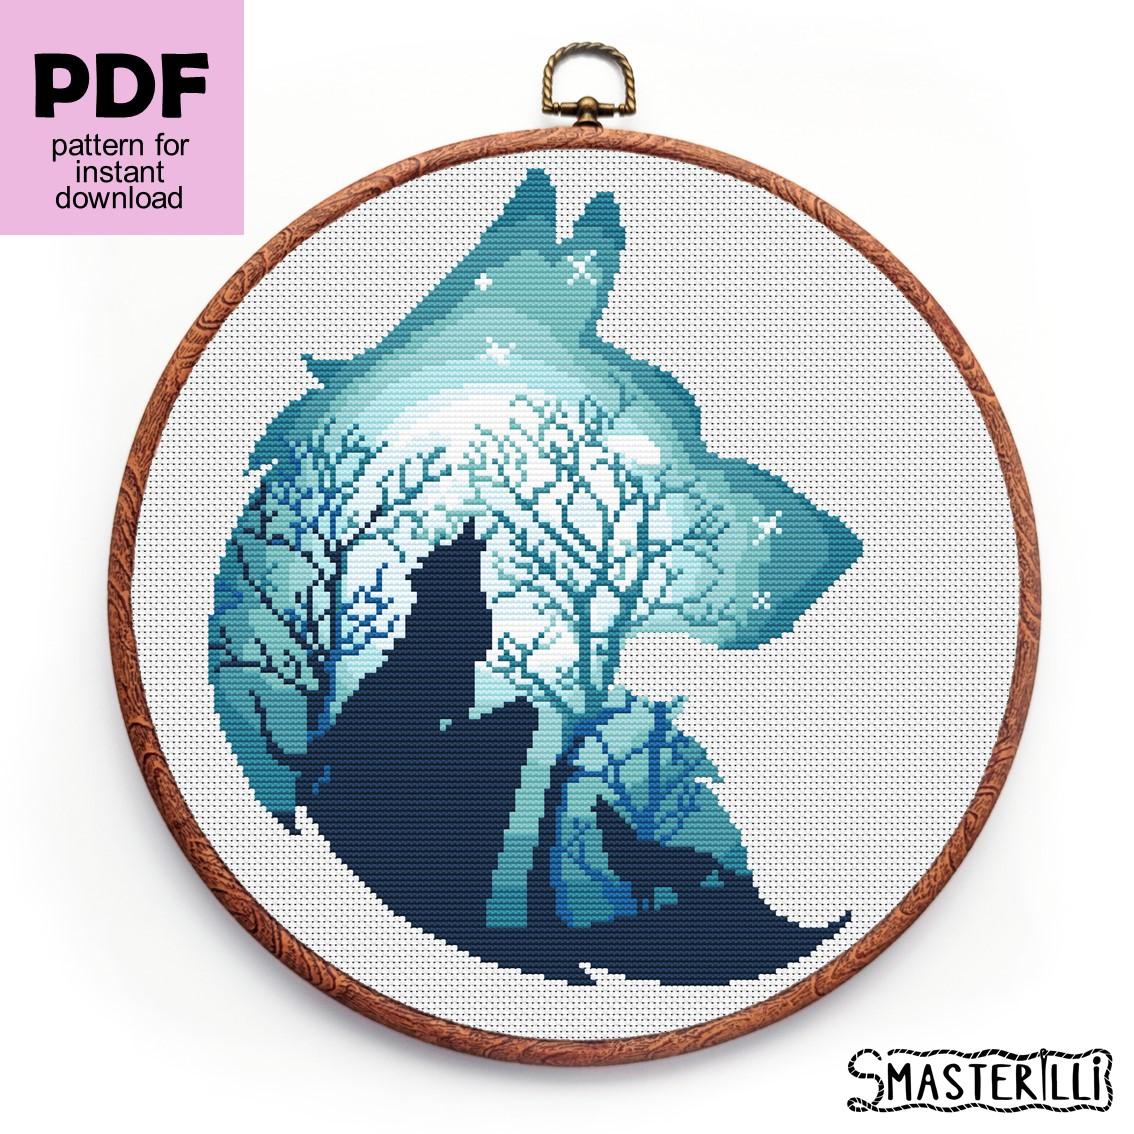 Blue woolf silhouette cross stitch pattern with moon night forest ornament. Embroidery design by Smasterilli. Digital cross stitch pattern for instant download. Forest animals and landscape embroidery design. #smasterilli #crossstitch #crossstitchpattern #wolfcrossstitch #moonlandscape #animalsilhouette #forestlandscape